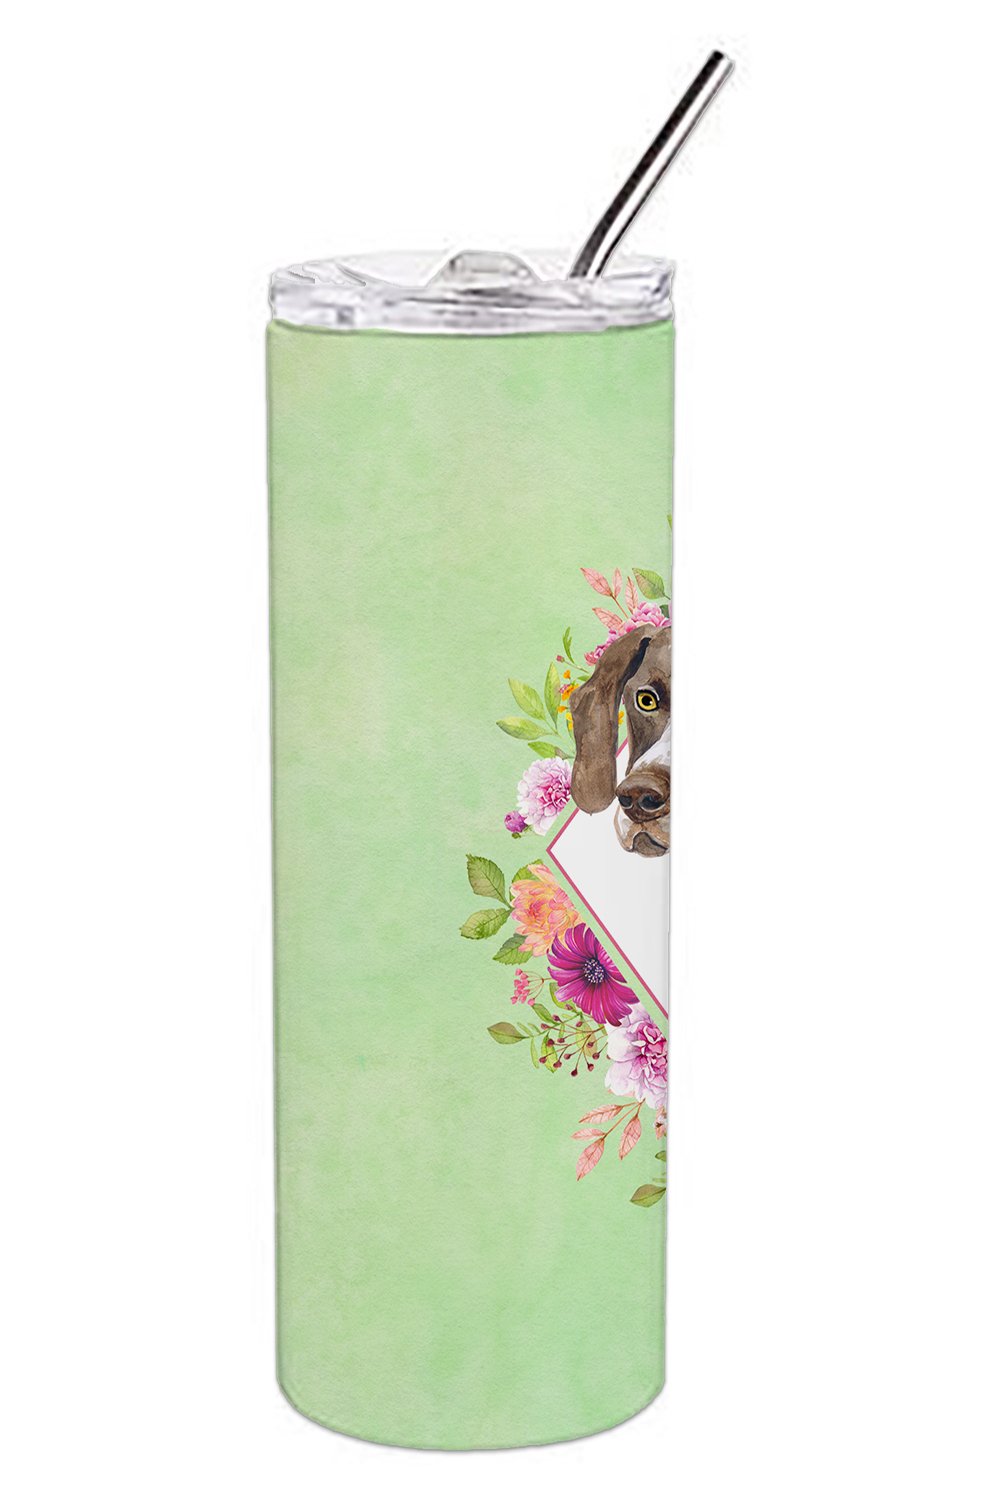 German Shorthaired Pointer Green Flowers Double Walled Stainless Steel 20 oz Skinny Tumbler CK4317TBL20 by Caroline's Treasures